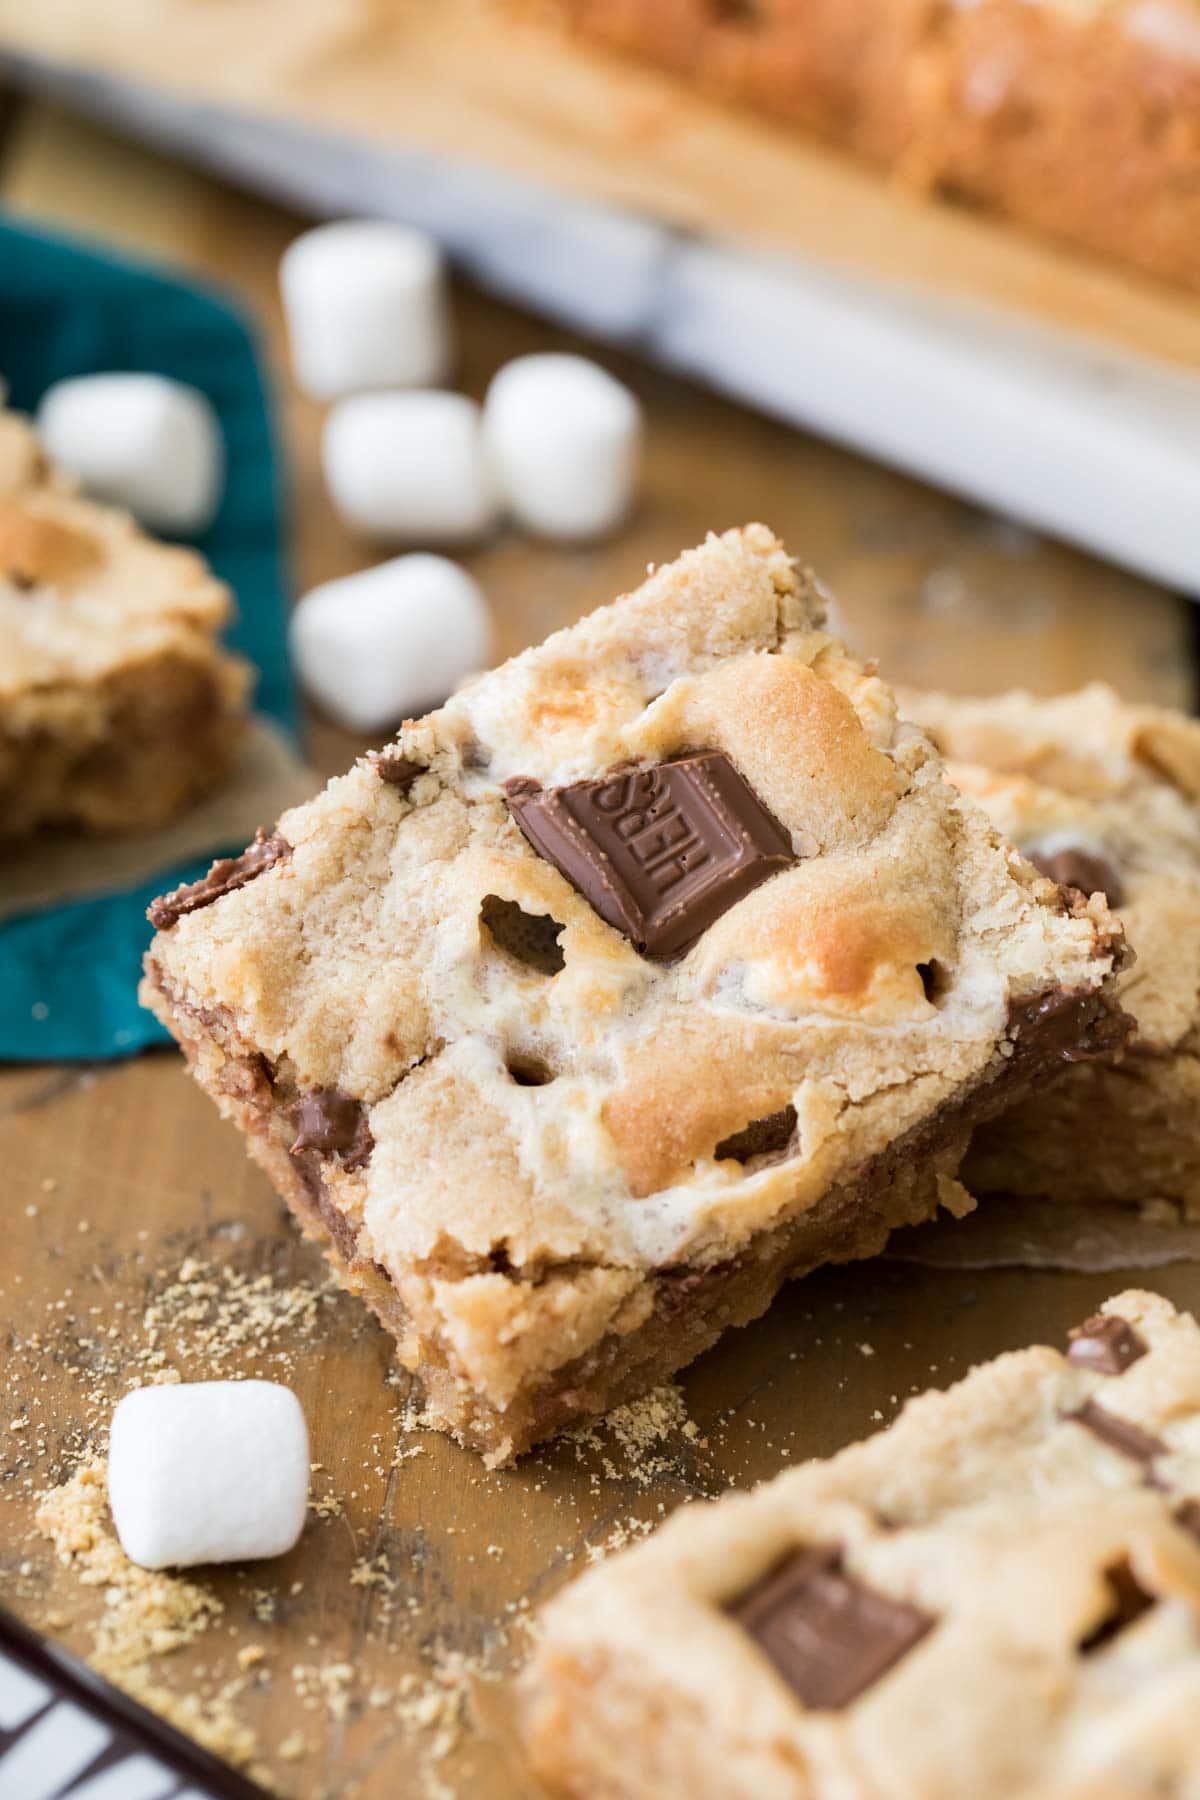 Peanut butter s'mores bar with chocolate bar pieces pressed into the top surrounded by mini marshmallows.